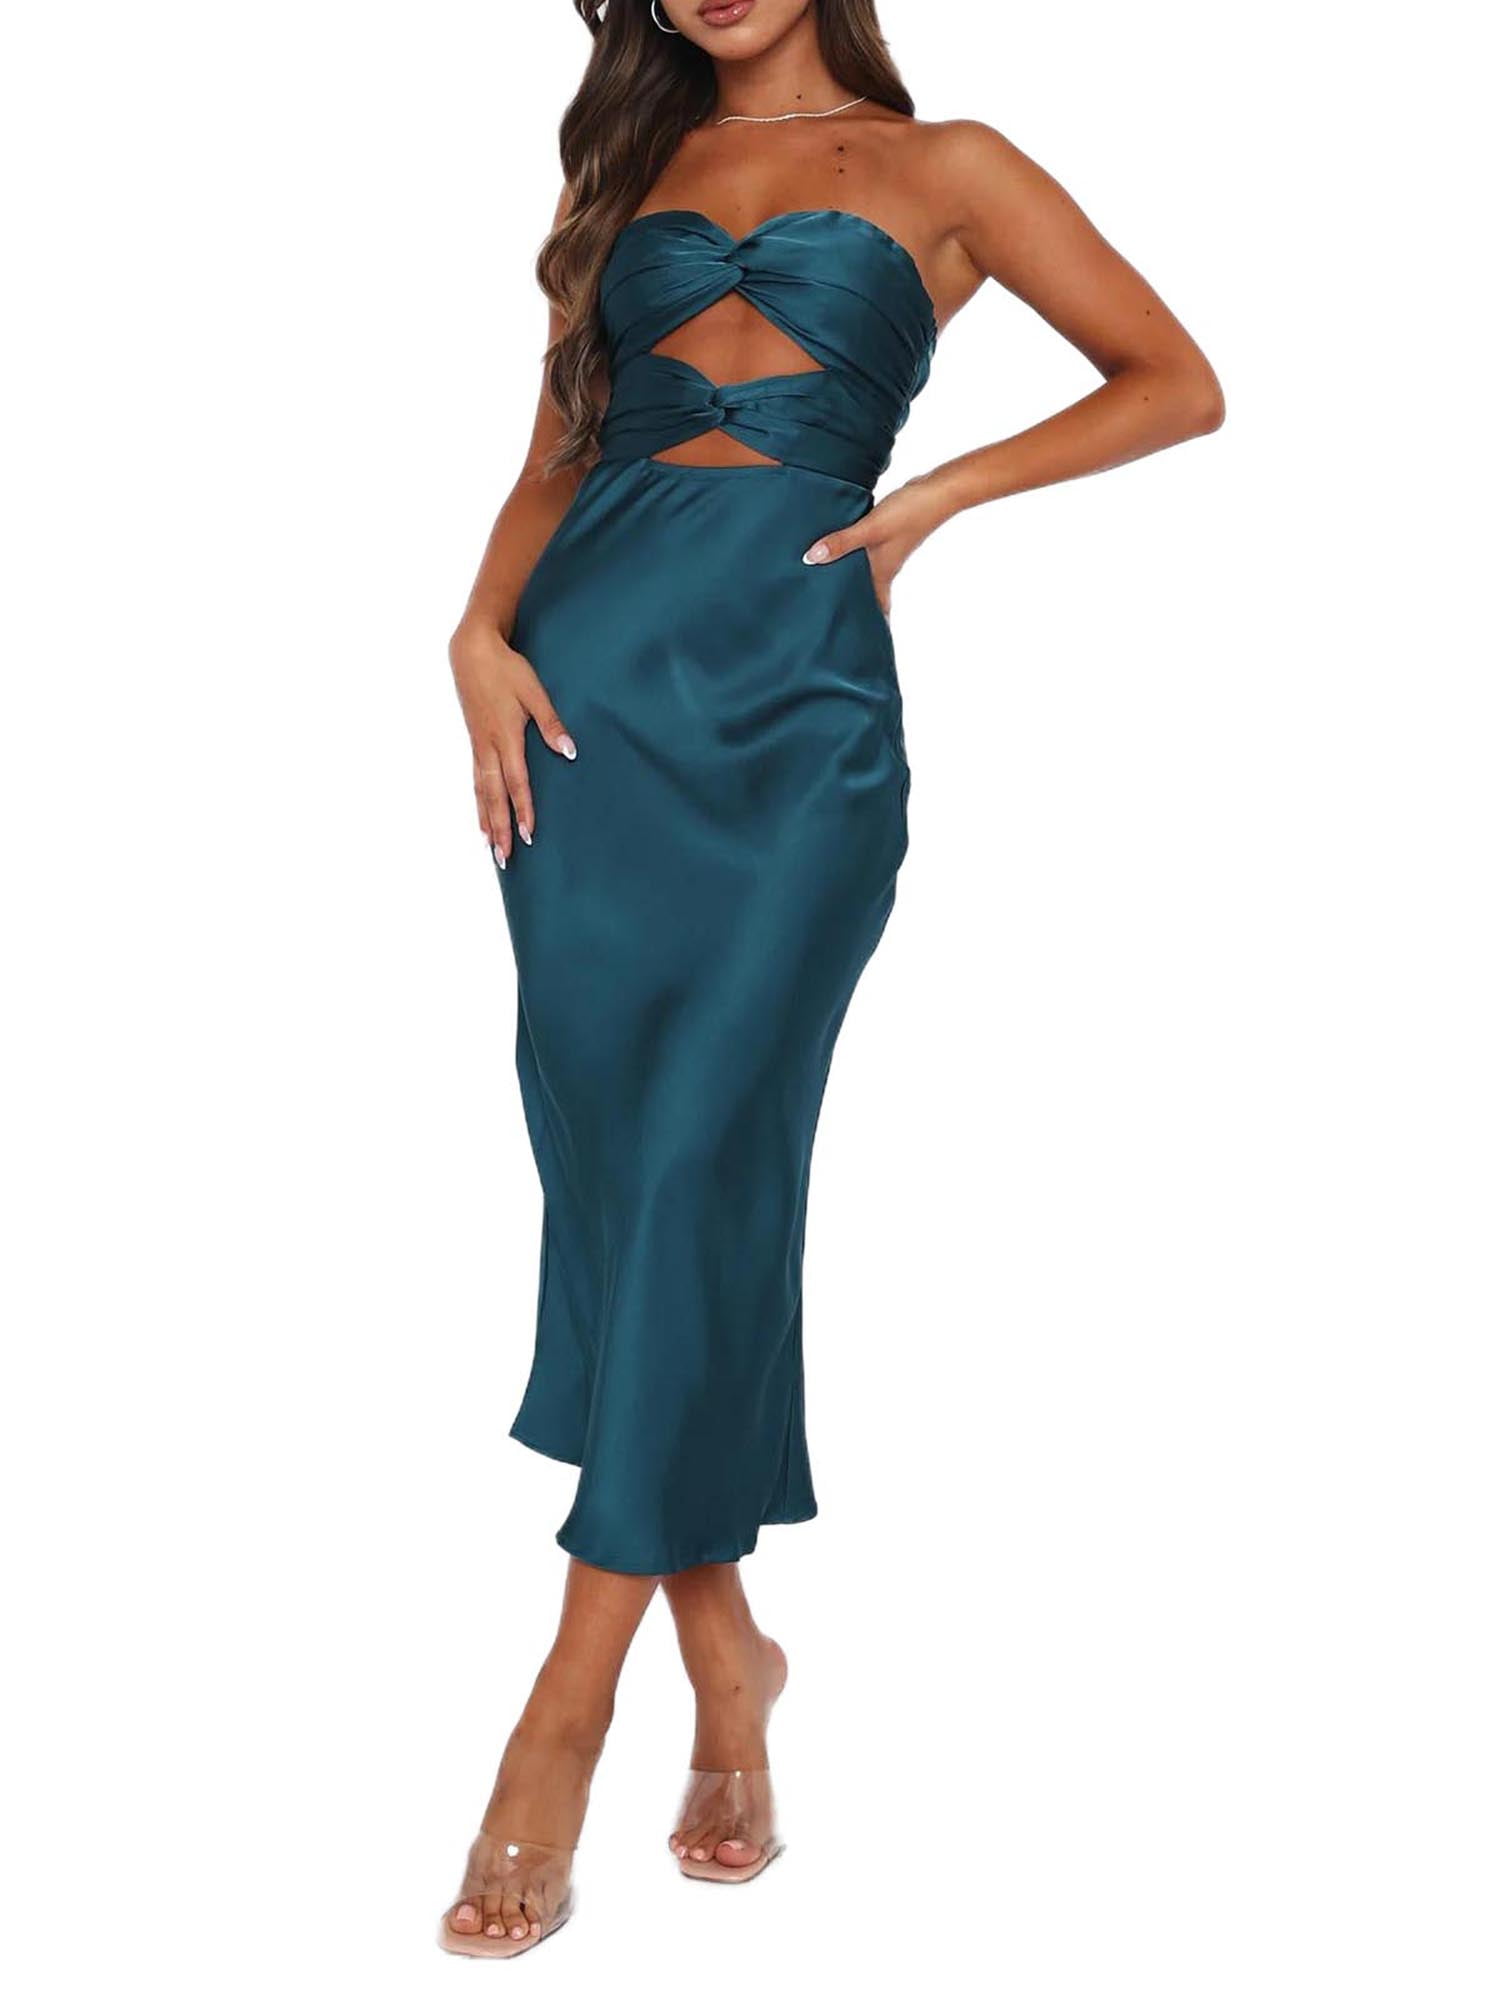 Coduop Women's Cutout Backless Maxi Dress Strapless Cross Tie-Up Bodycon  Cocktail Dresses 